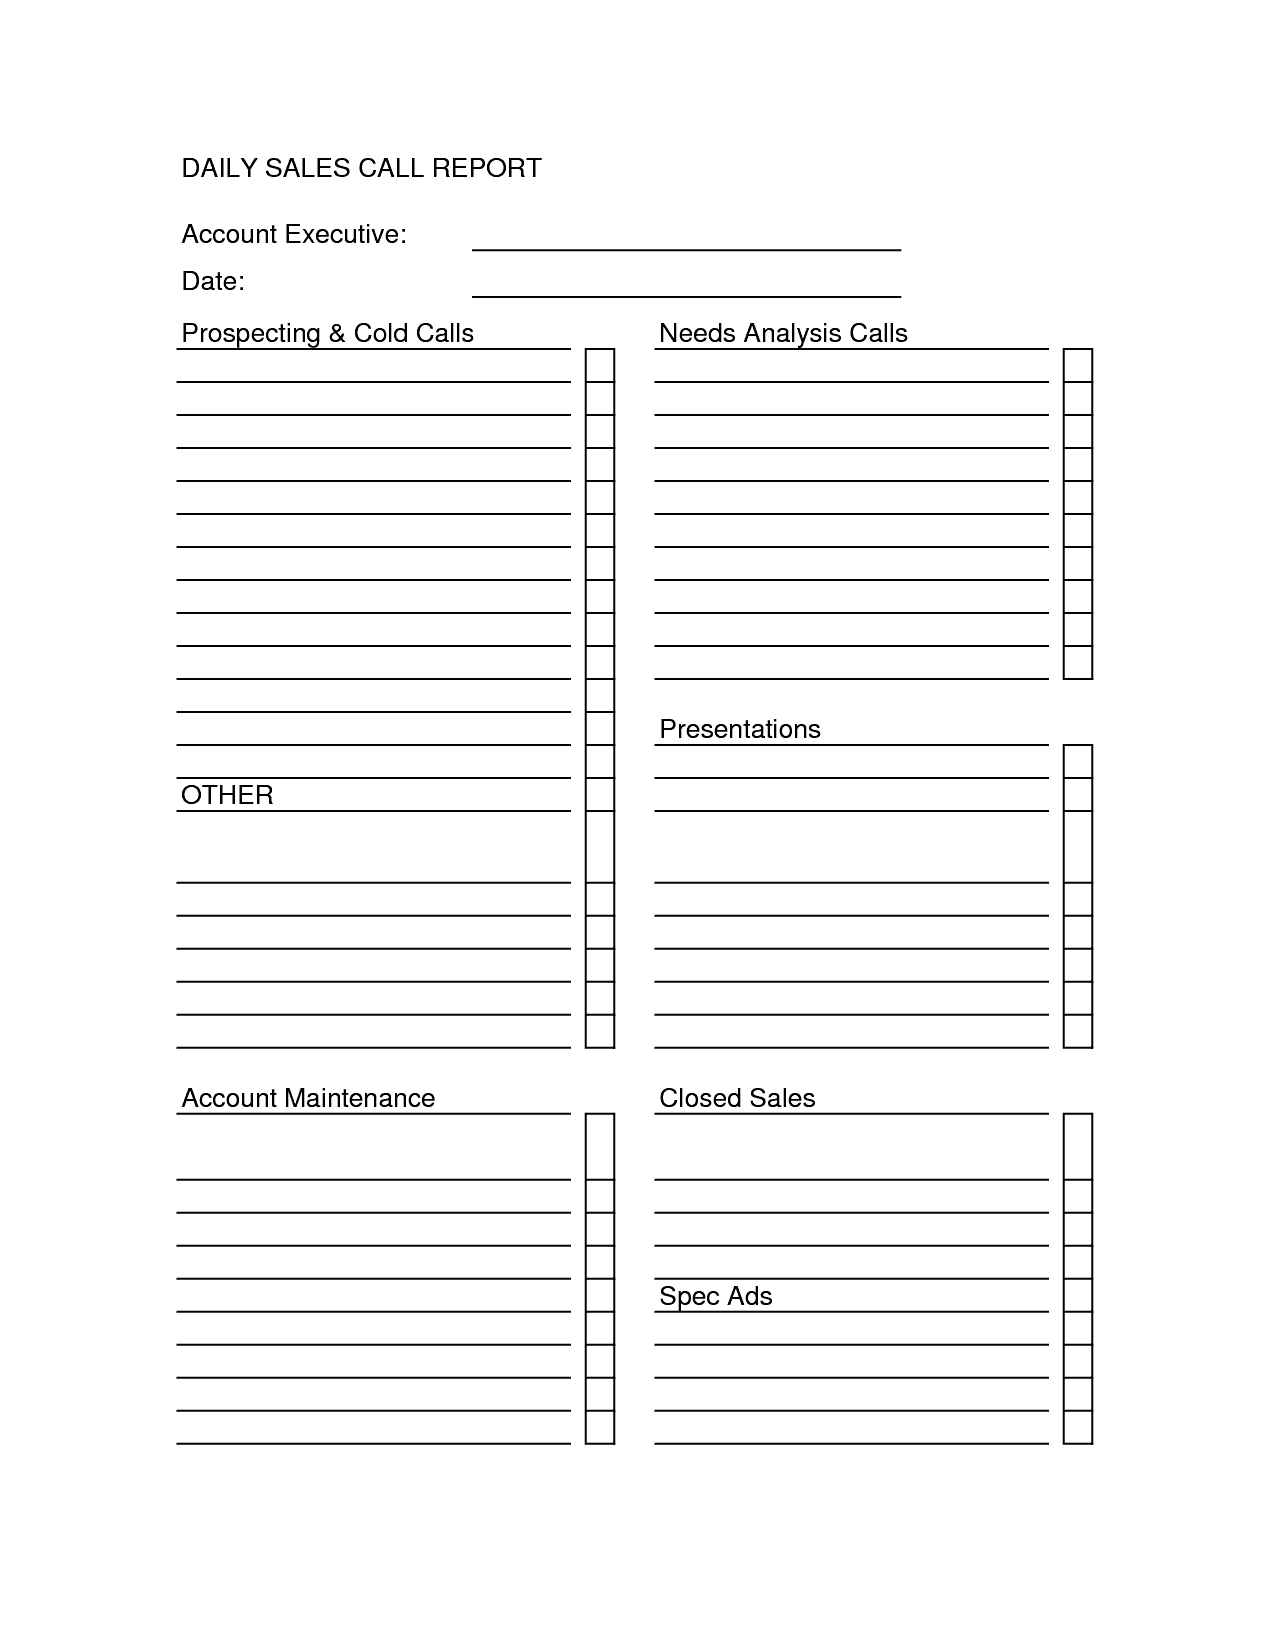 Sales Call Report Templates - Word Excel Fomats Inside Sales Call Report Template